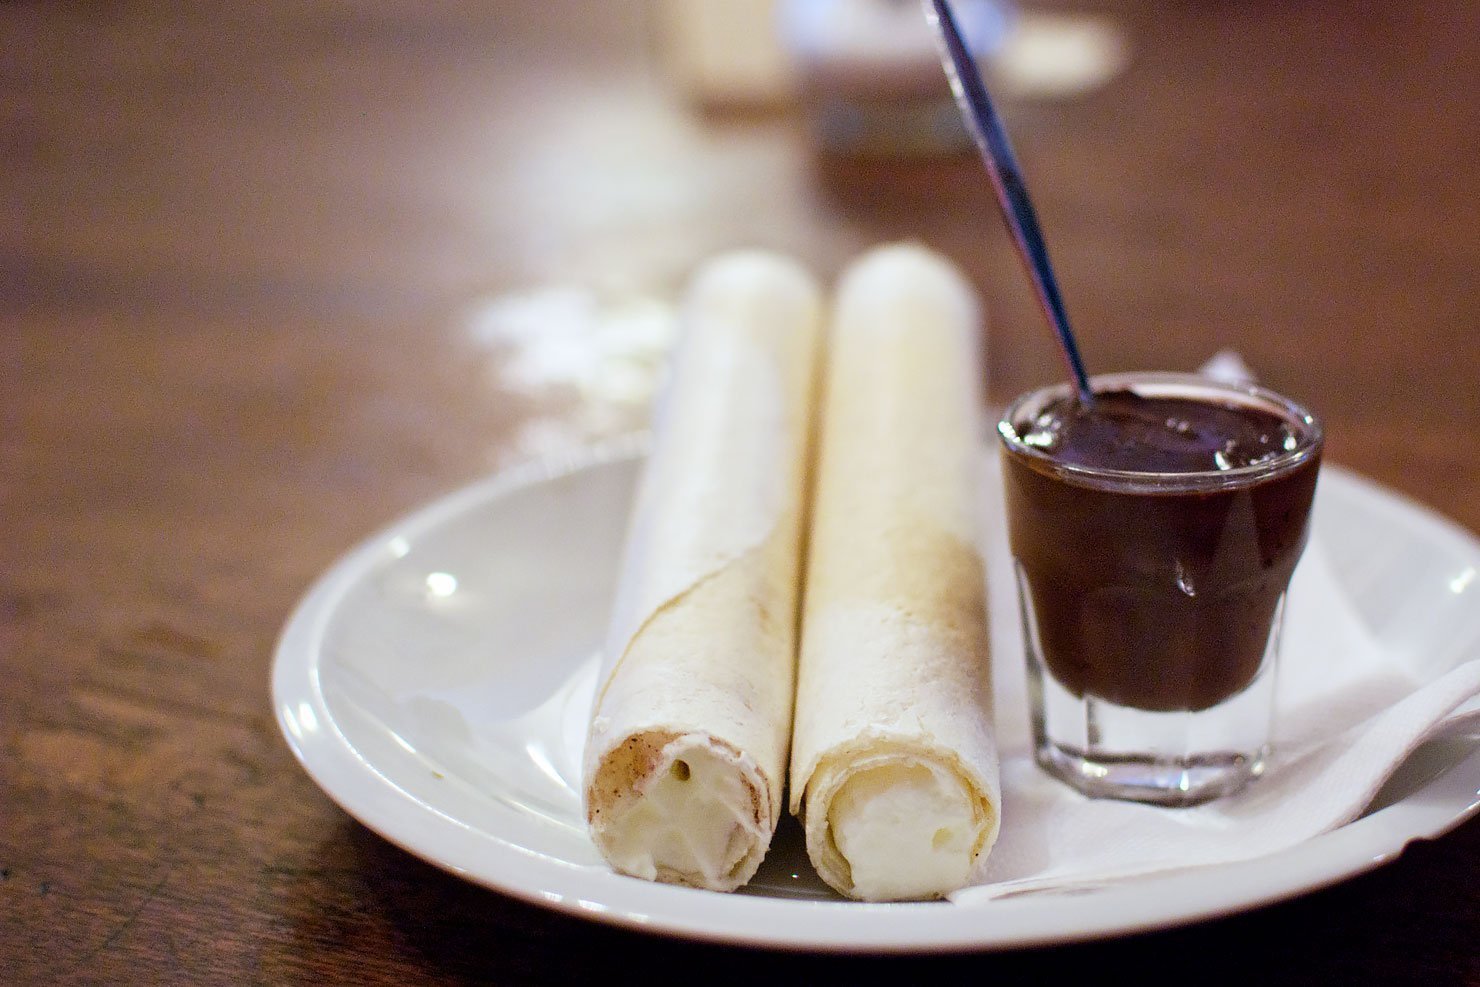 Things to do in Prague: Eating Prague Food Tour - Horice rolled wafers with hot chocolate at Choco cafe U Corvine Zidle.